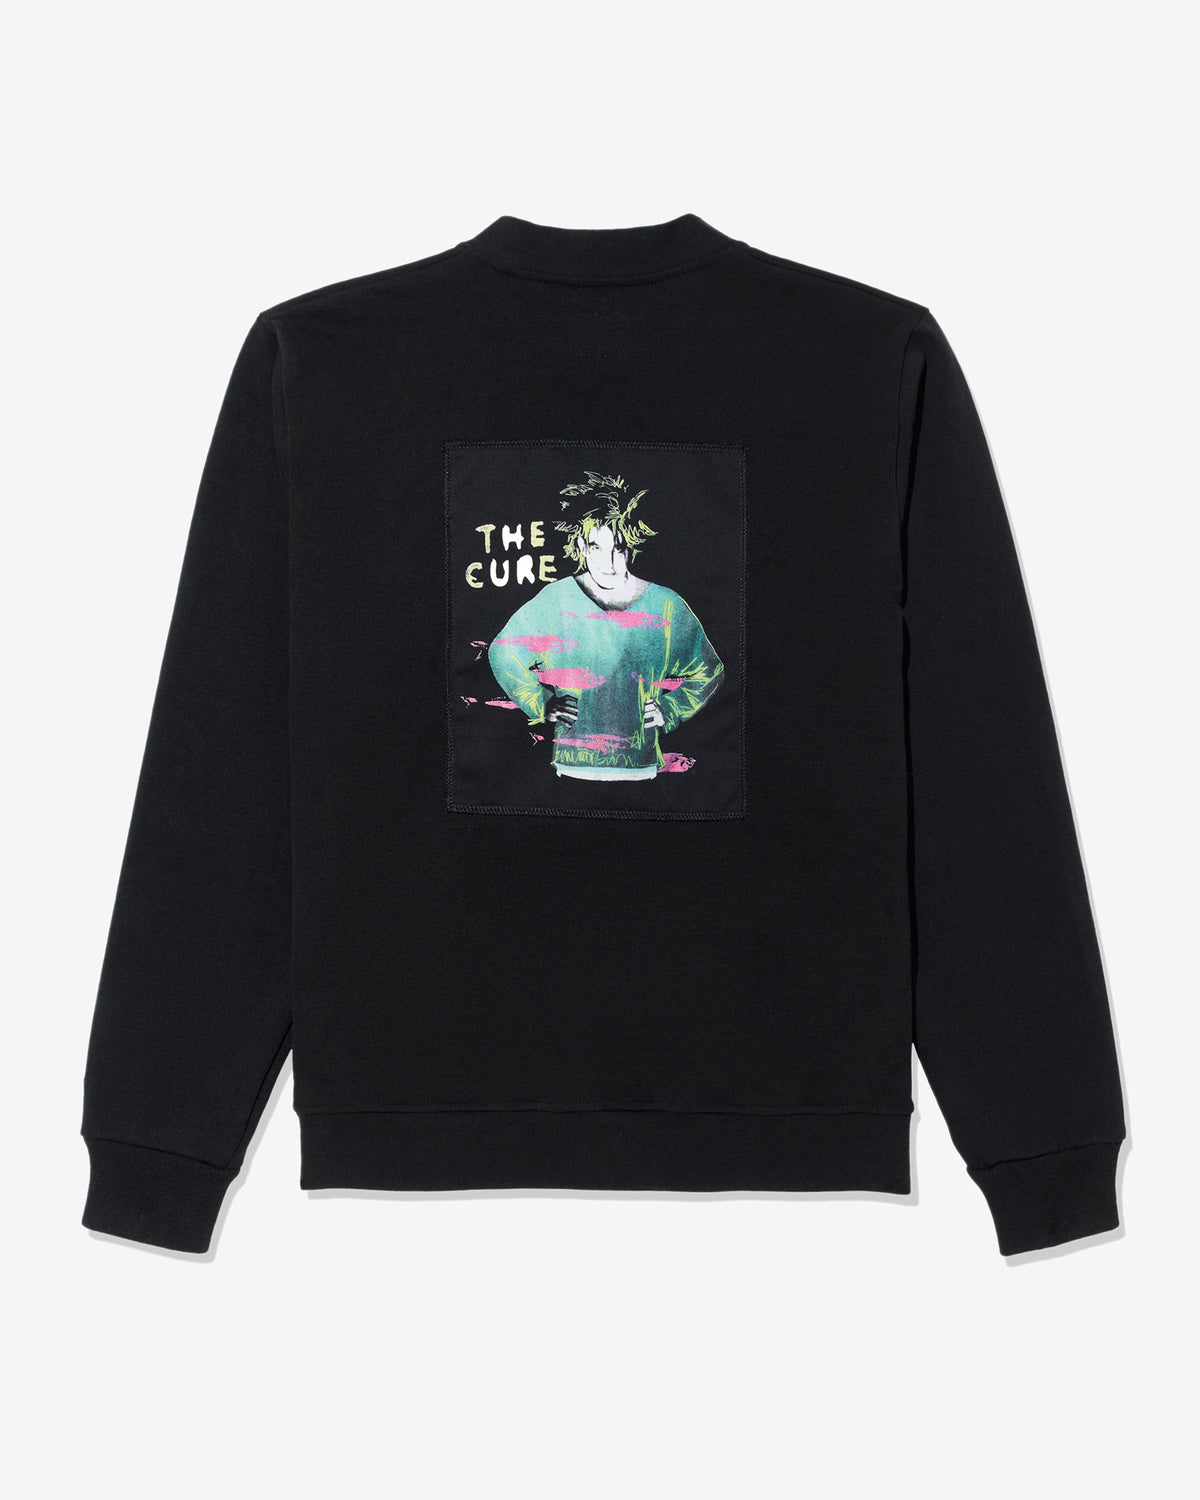 Noah x The Cure Rugby Cardigan